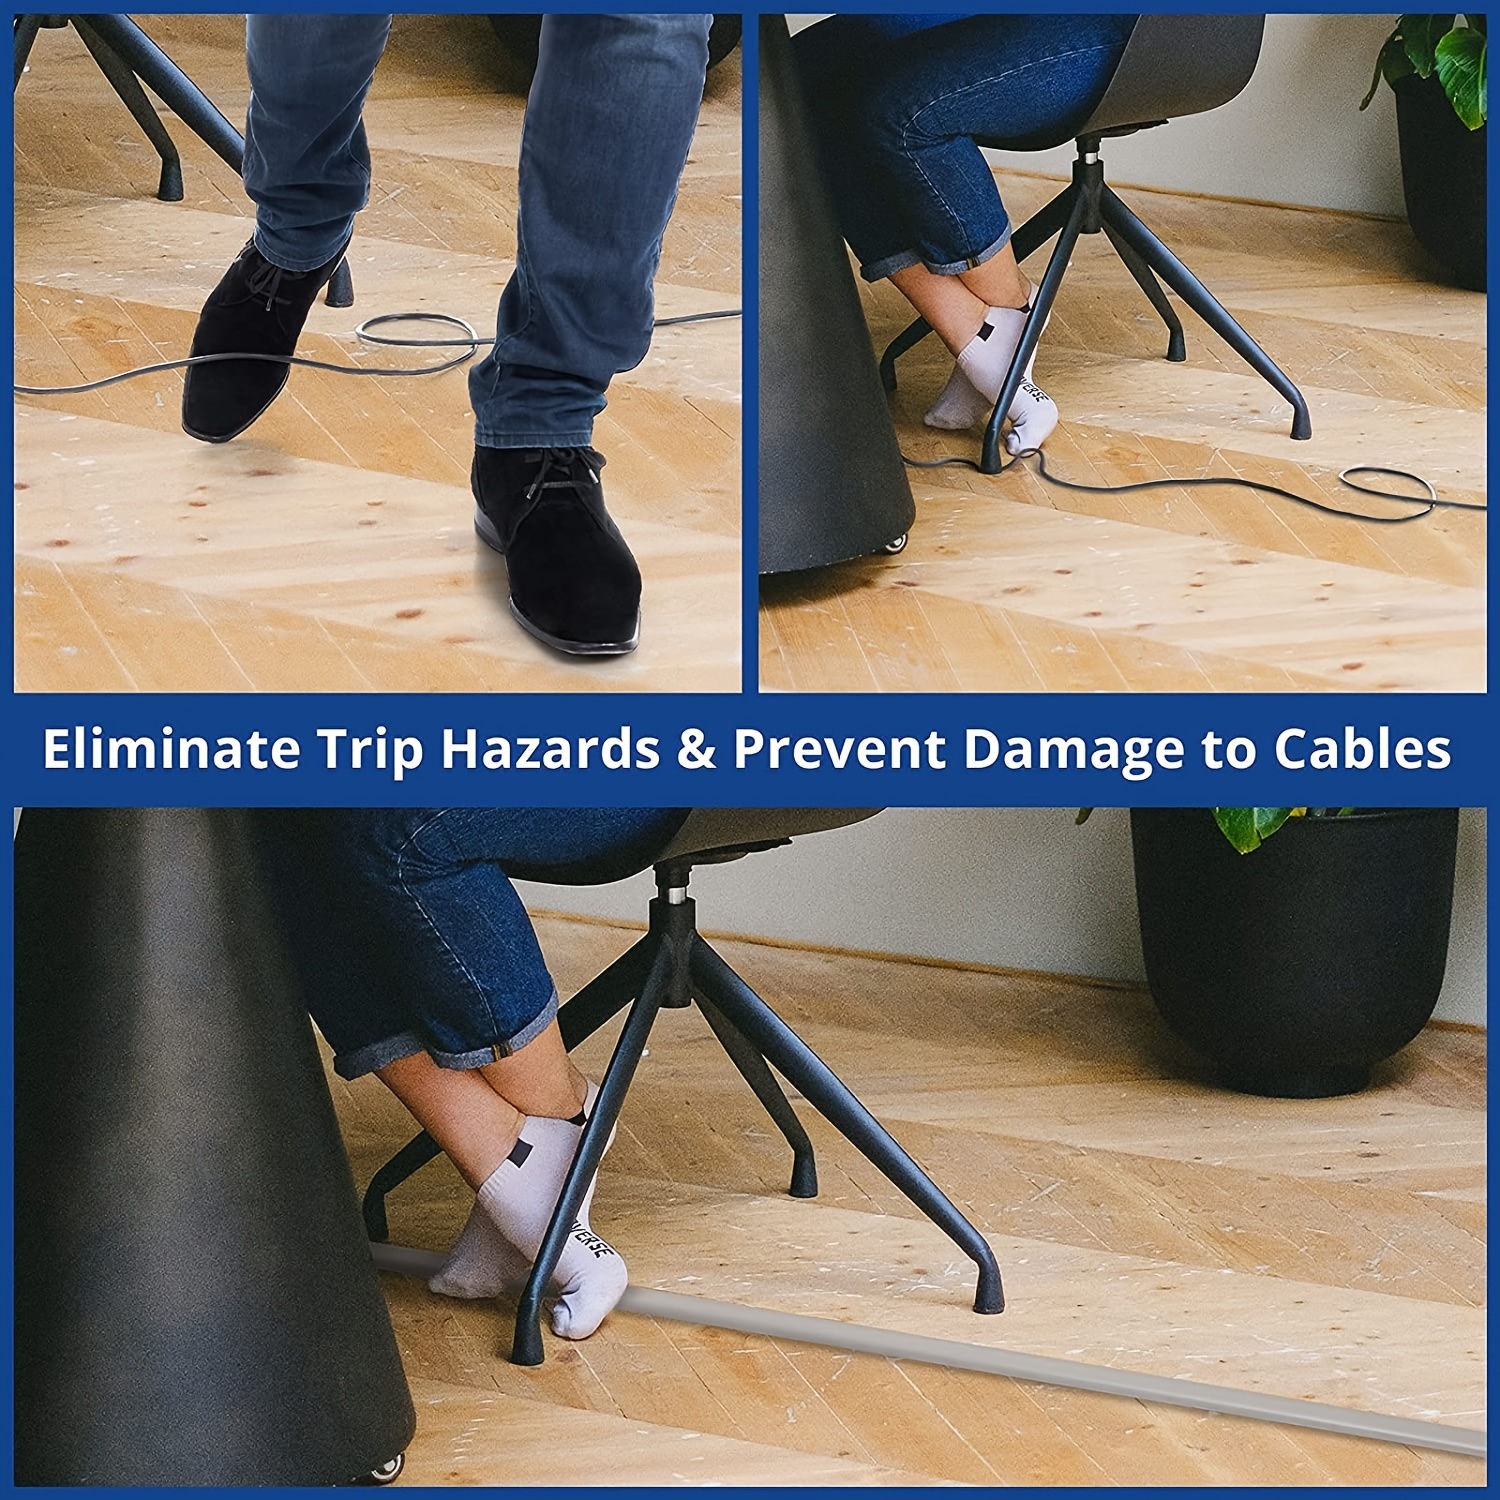 Floor Cord Covers: Safety Meets Elegance